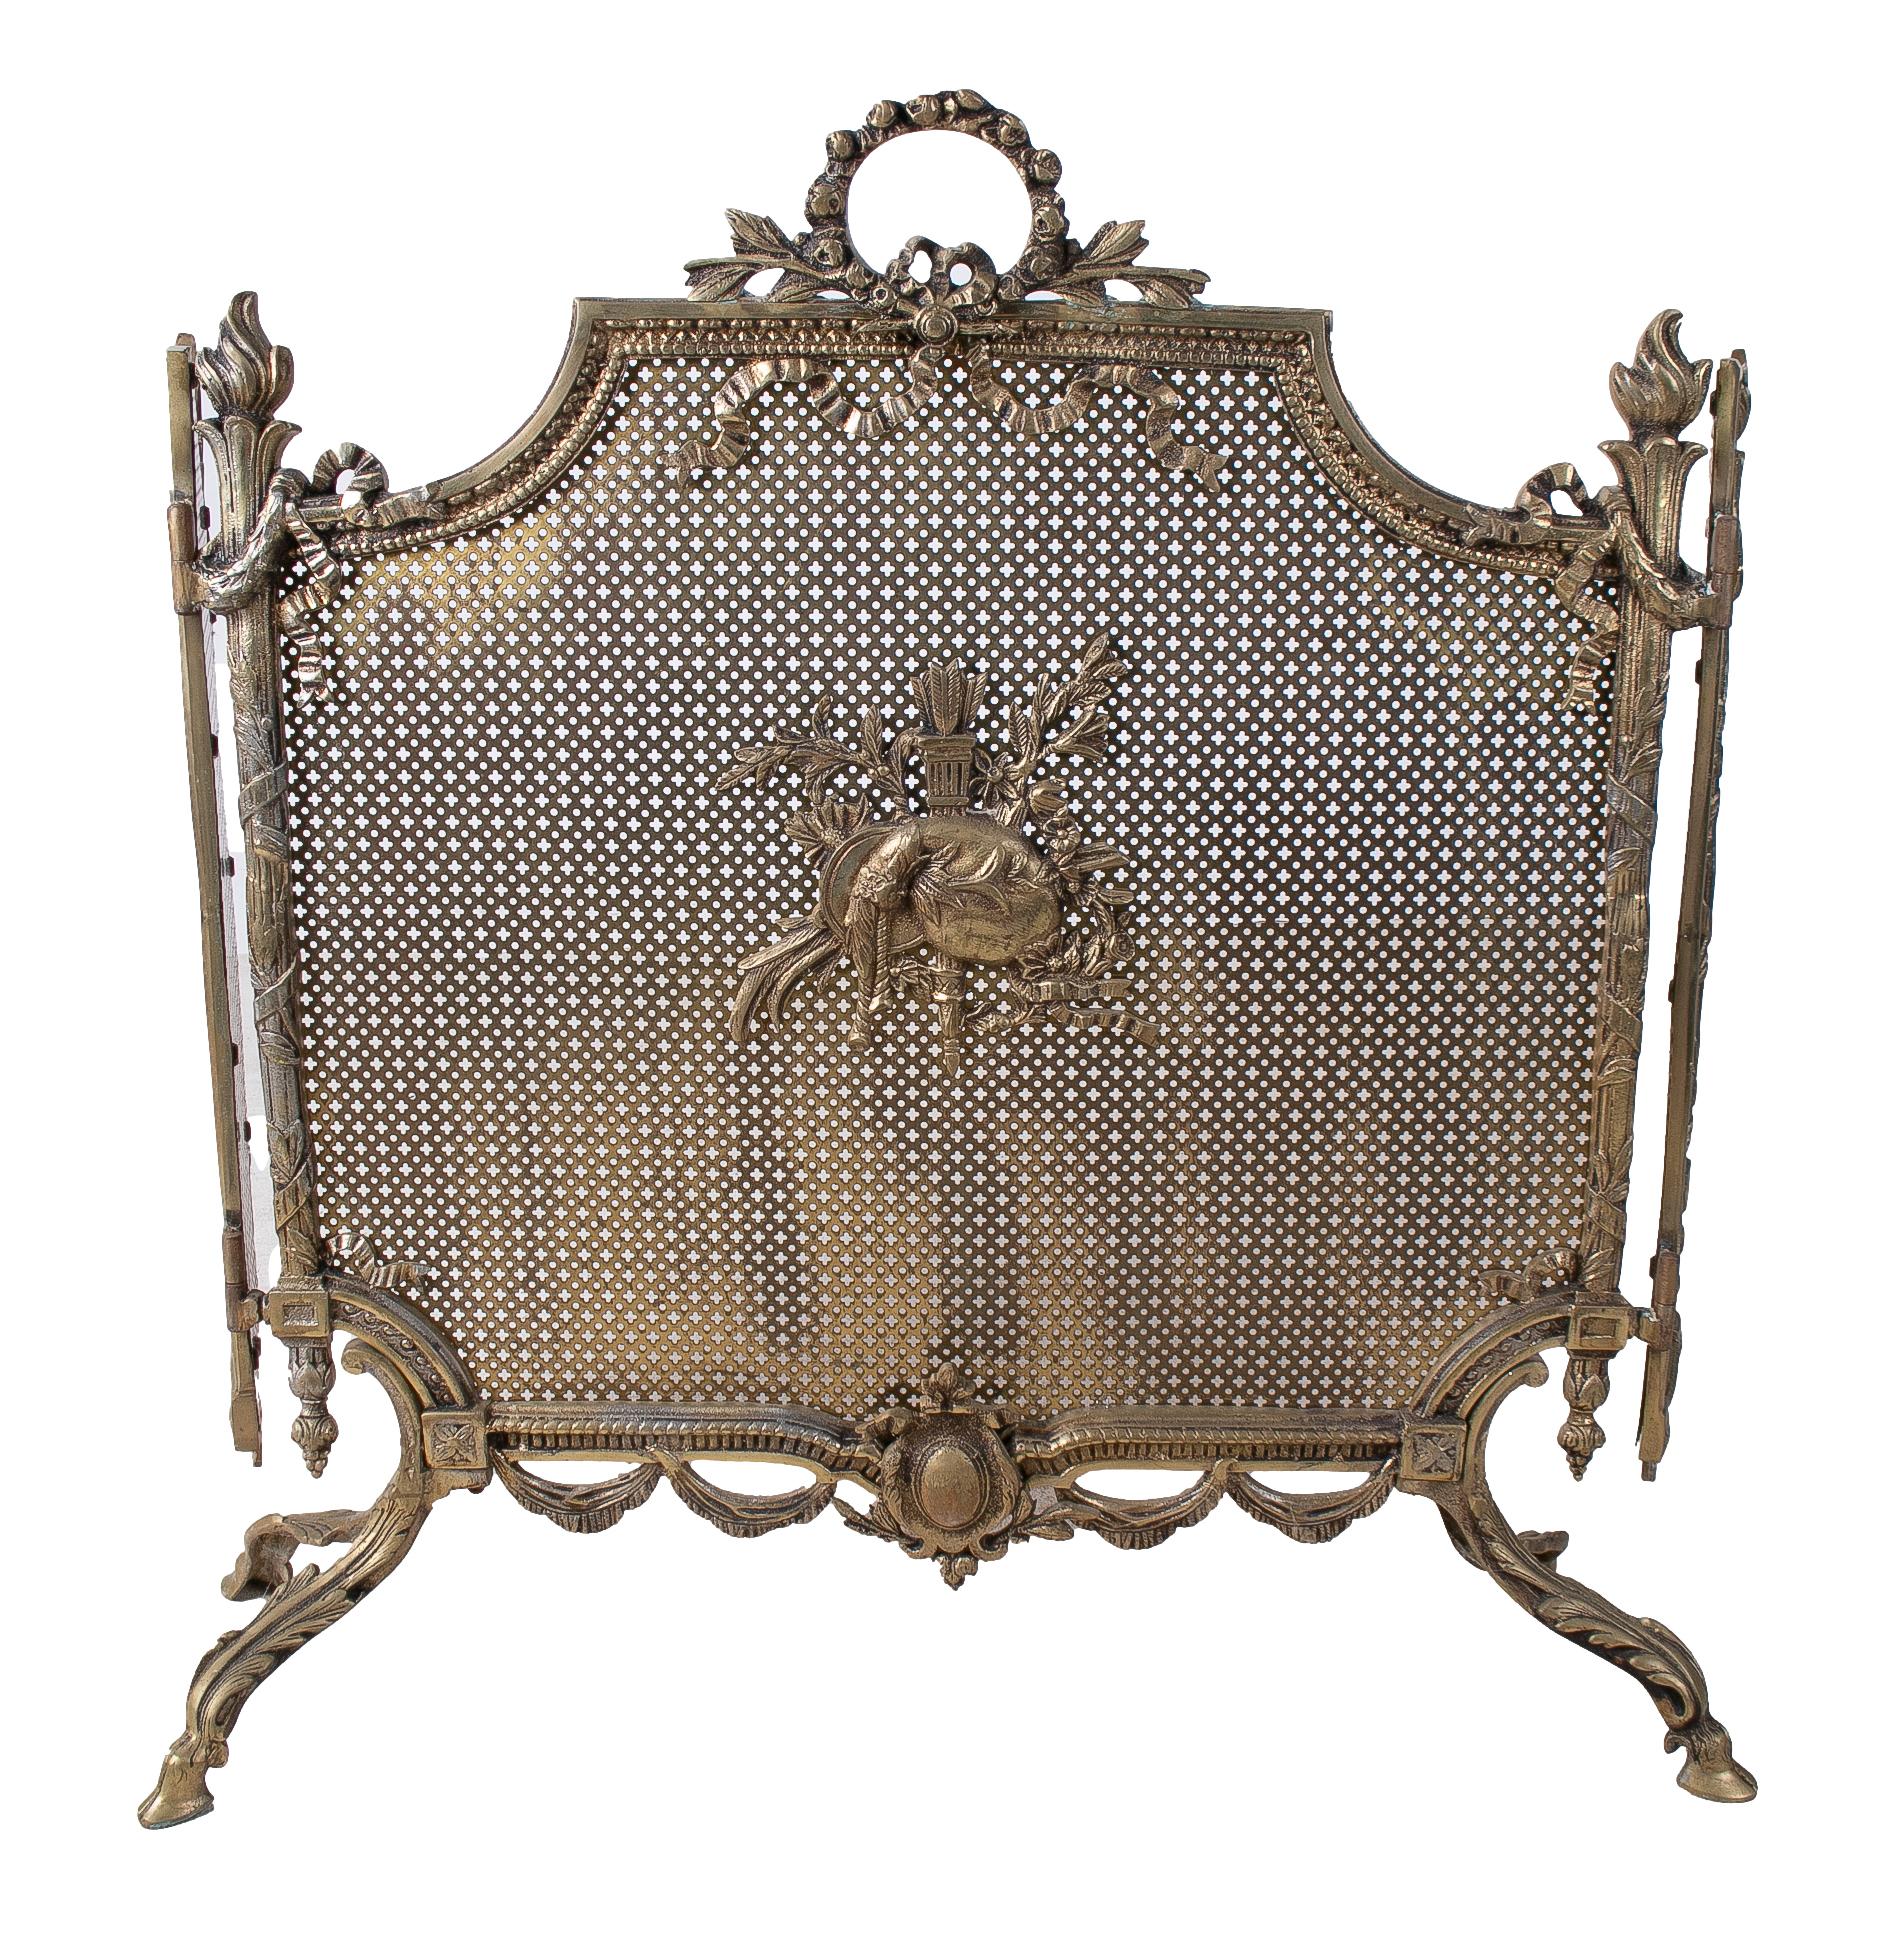 1970s French bronze three panel fireplace screen with baroque ornamentation.